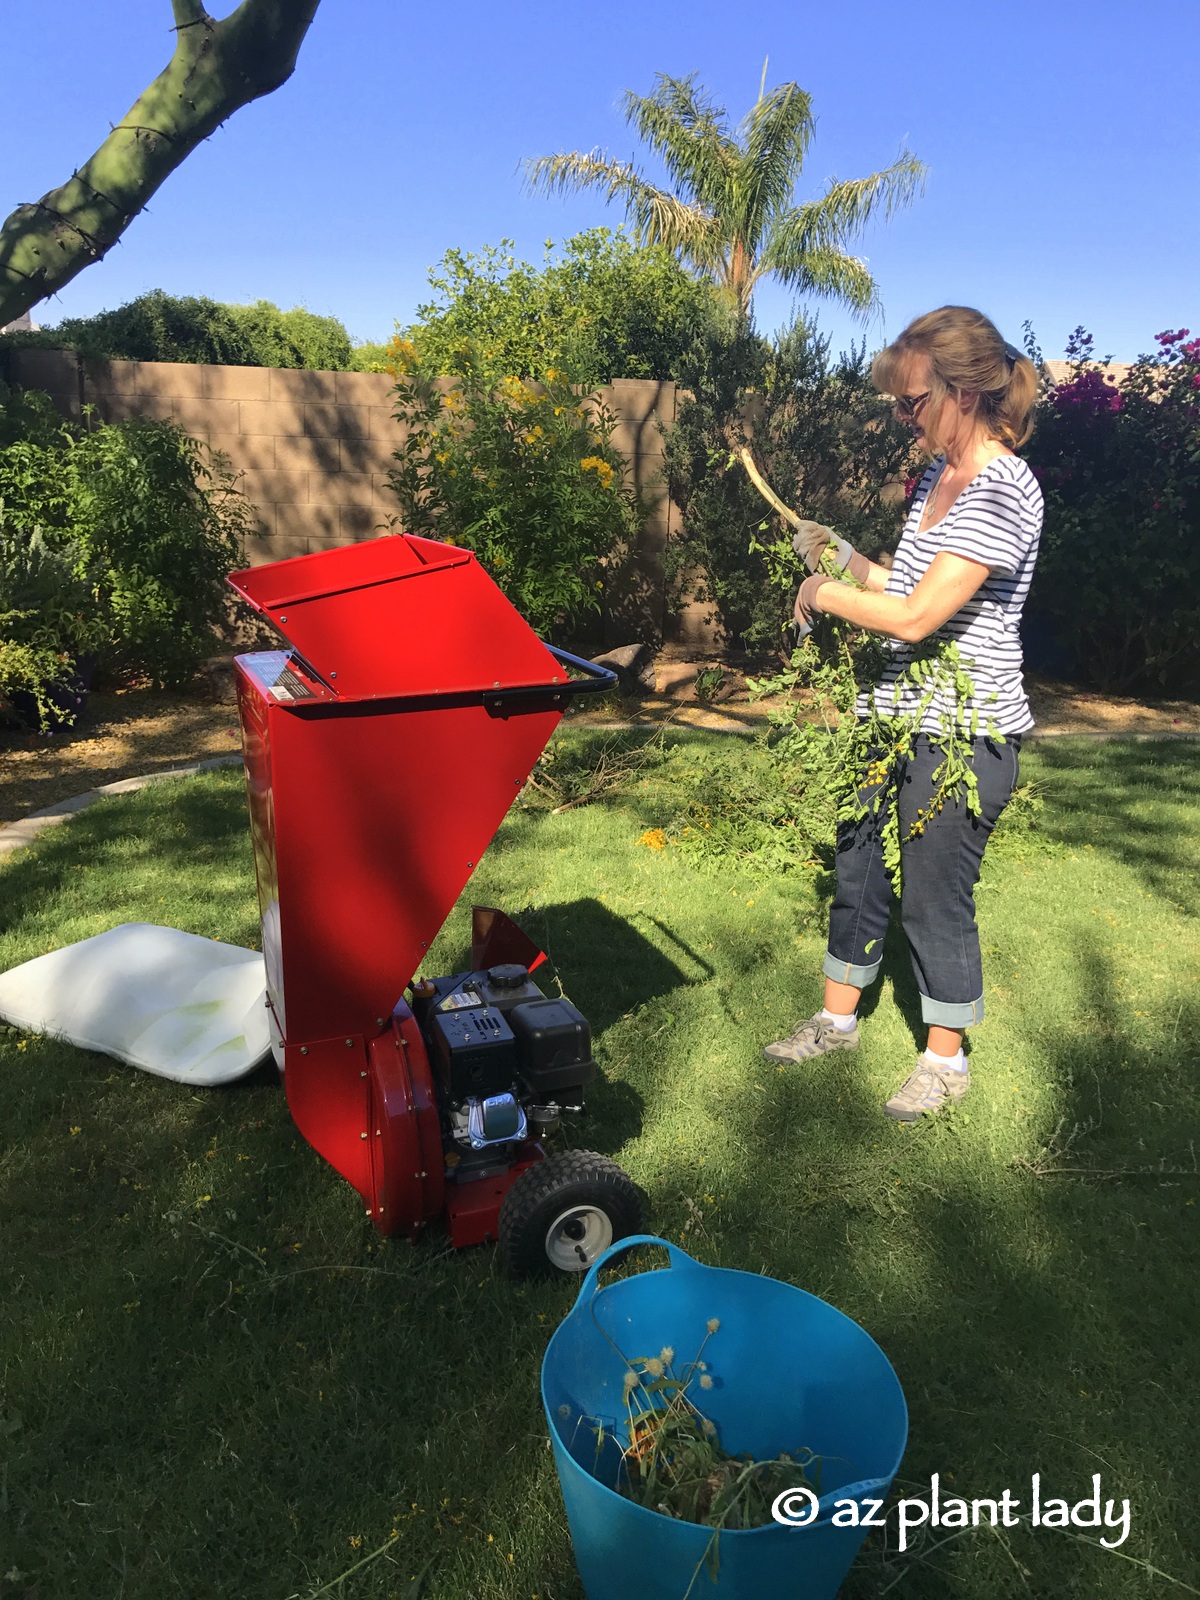 PRODUCT REVIEW: A MACHINE TO MAKE GORGEOUS COMPOST AND FREE MULCH